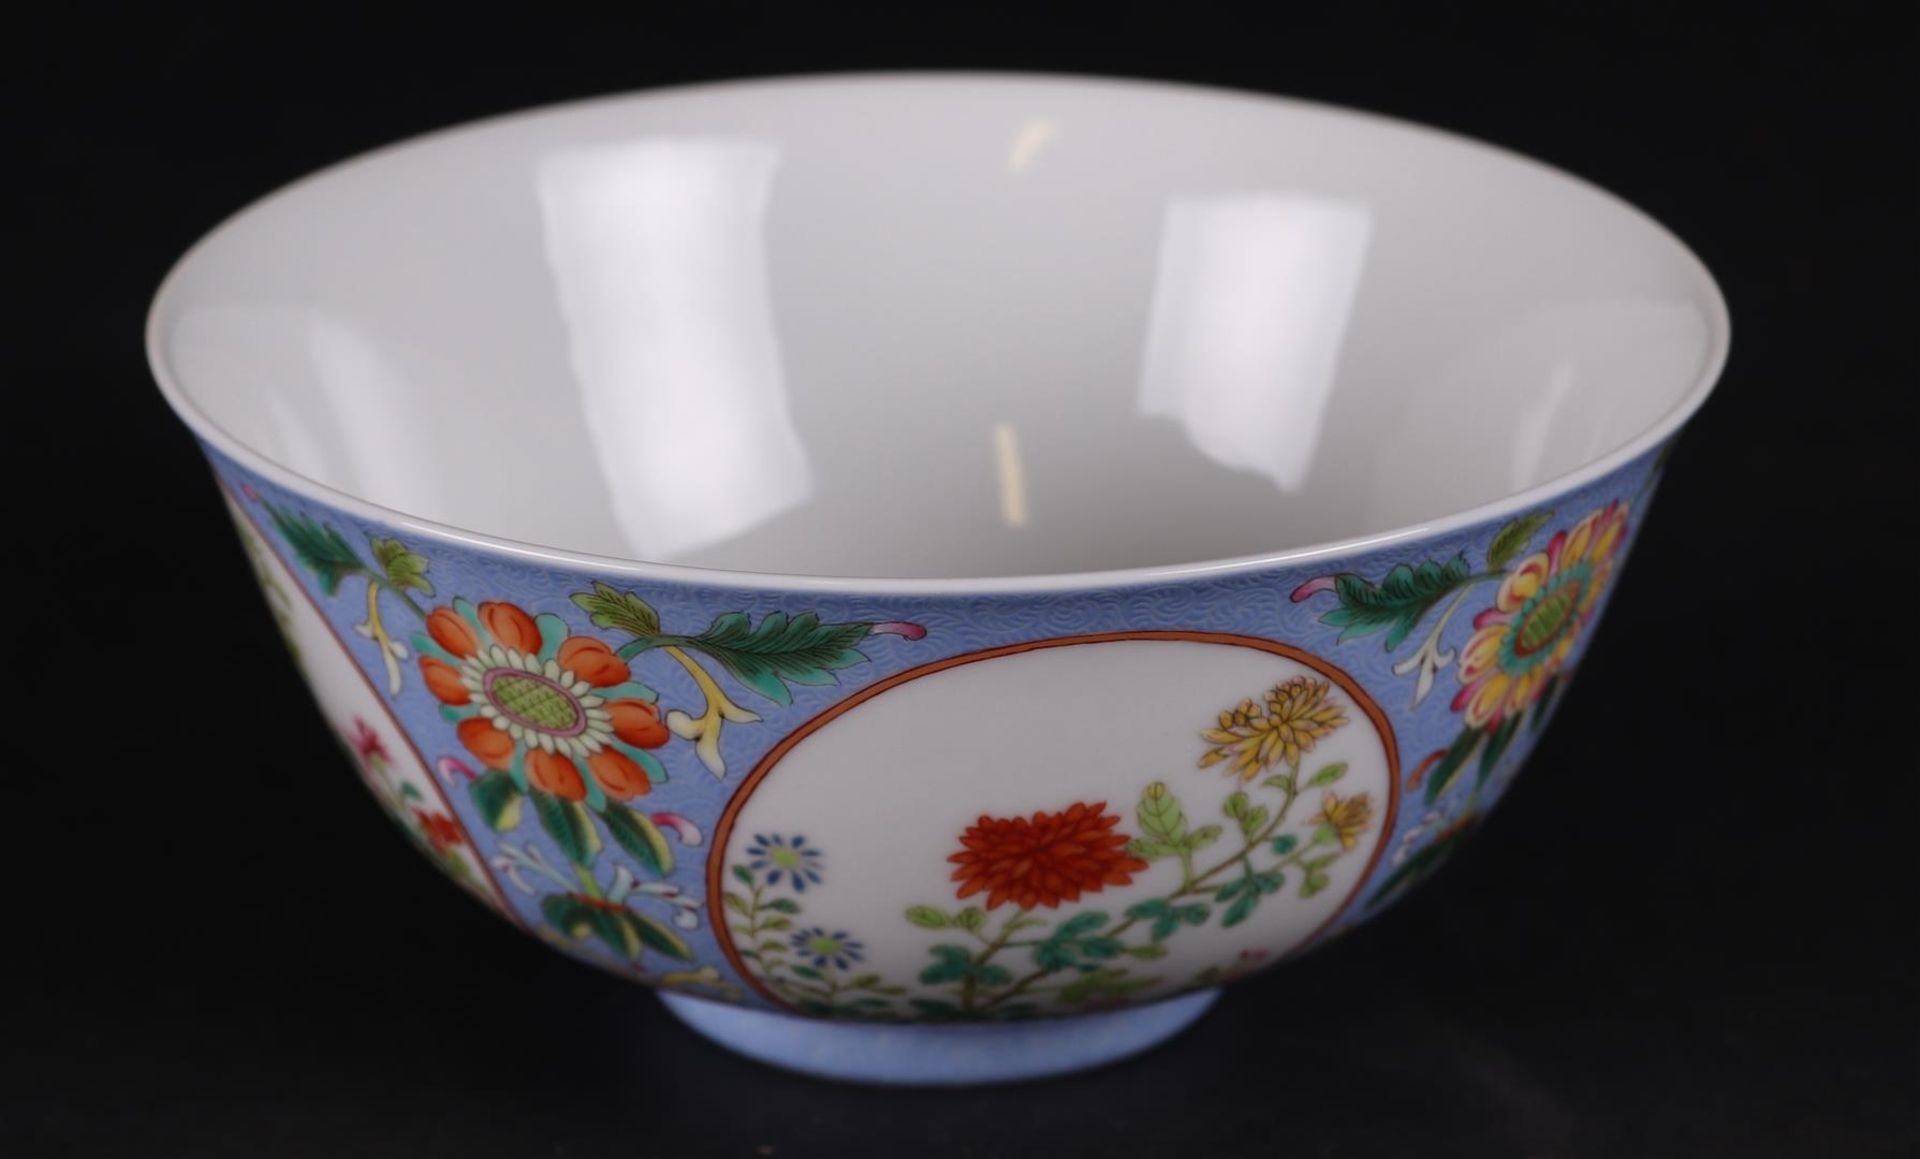 A porcelain Famile Rose bowl, marked Daoguang. China, 20th century. - Image 2 of 4